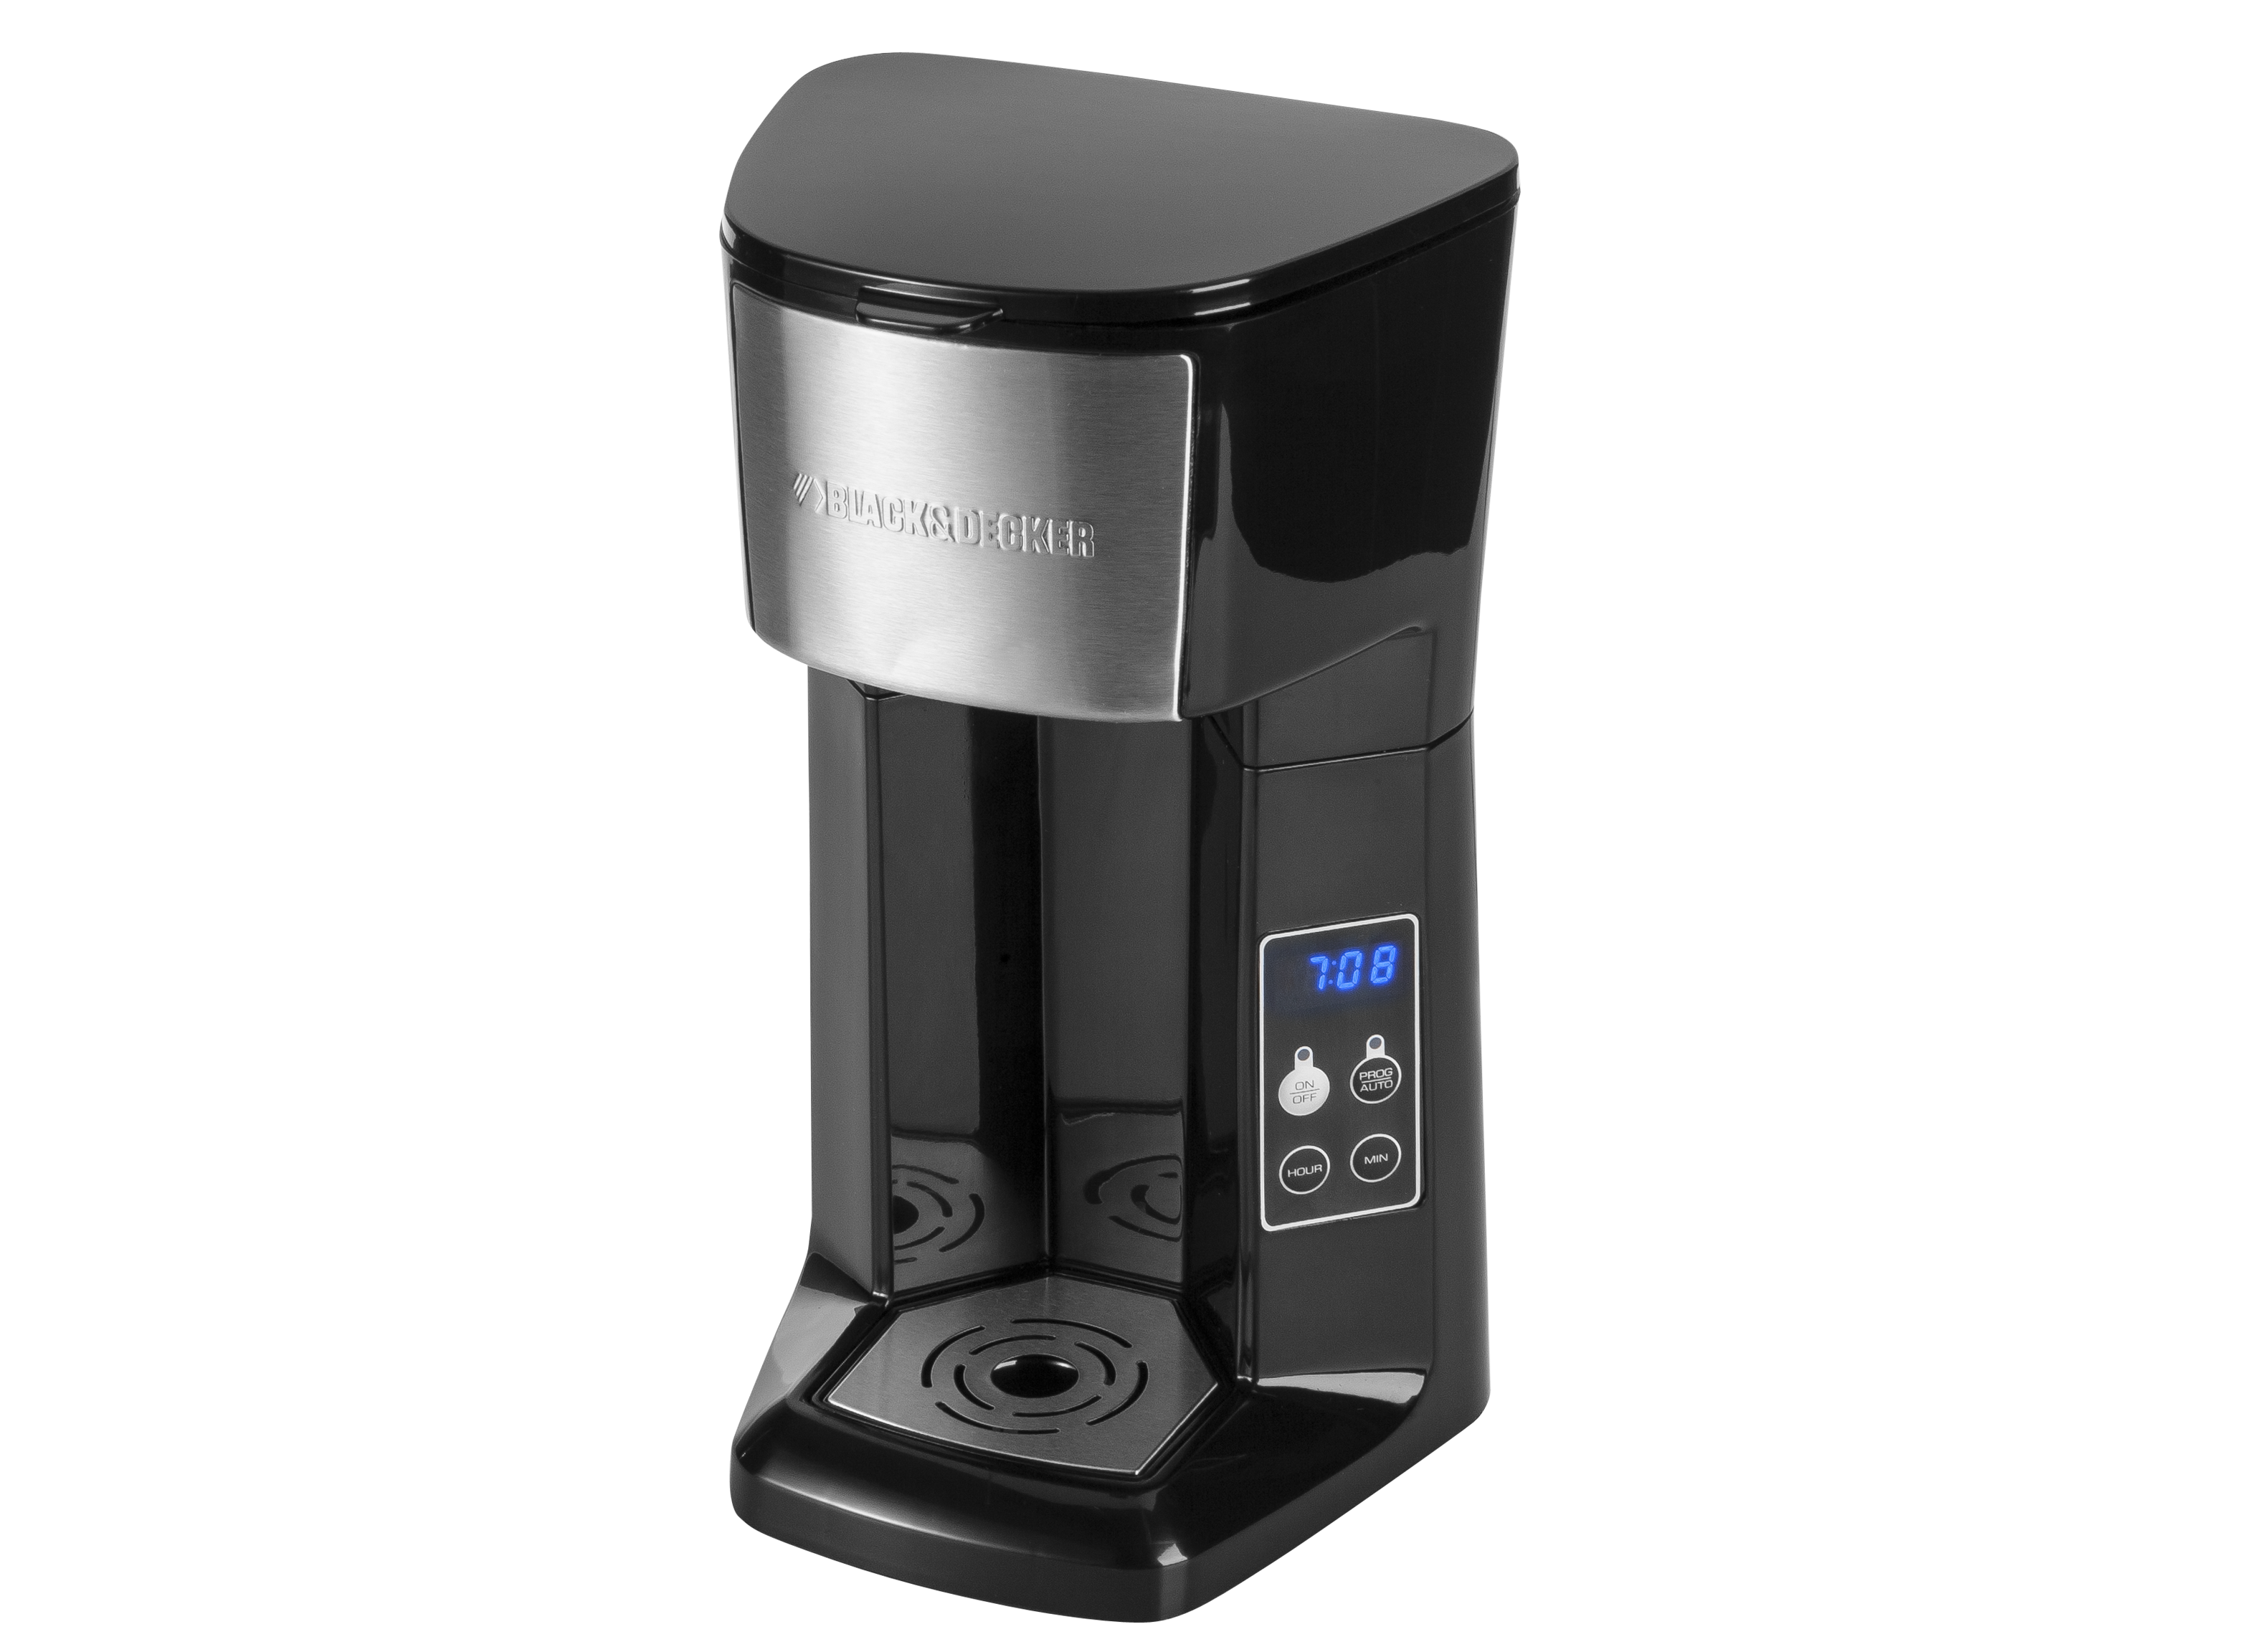 https://crdms.images.consumerreports.org/prod/products/cr/models/267980-coffeemakers-blackdecker-singleservecm620btarget.png